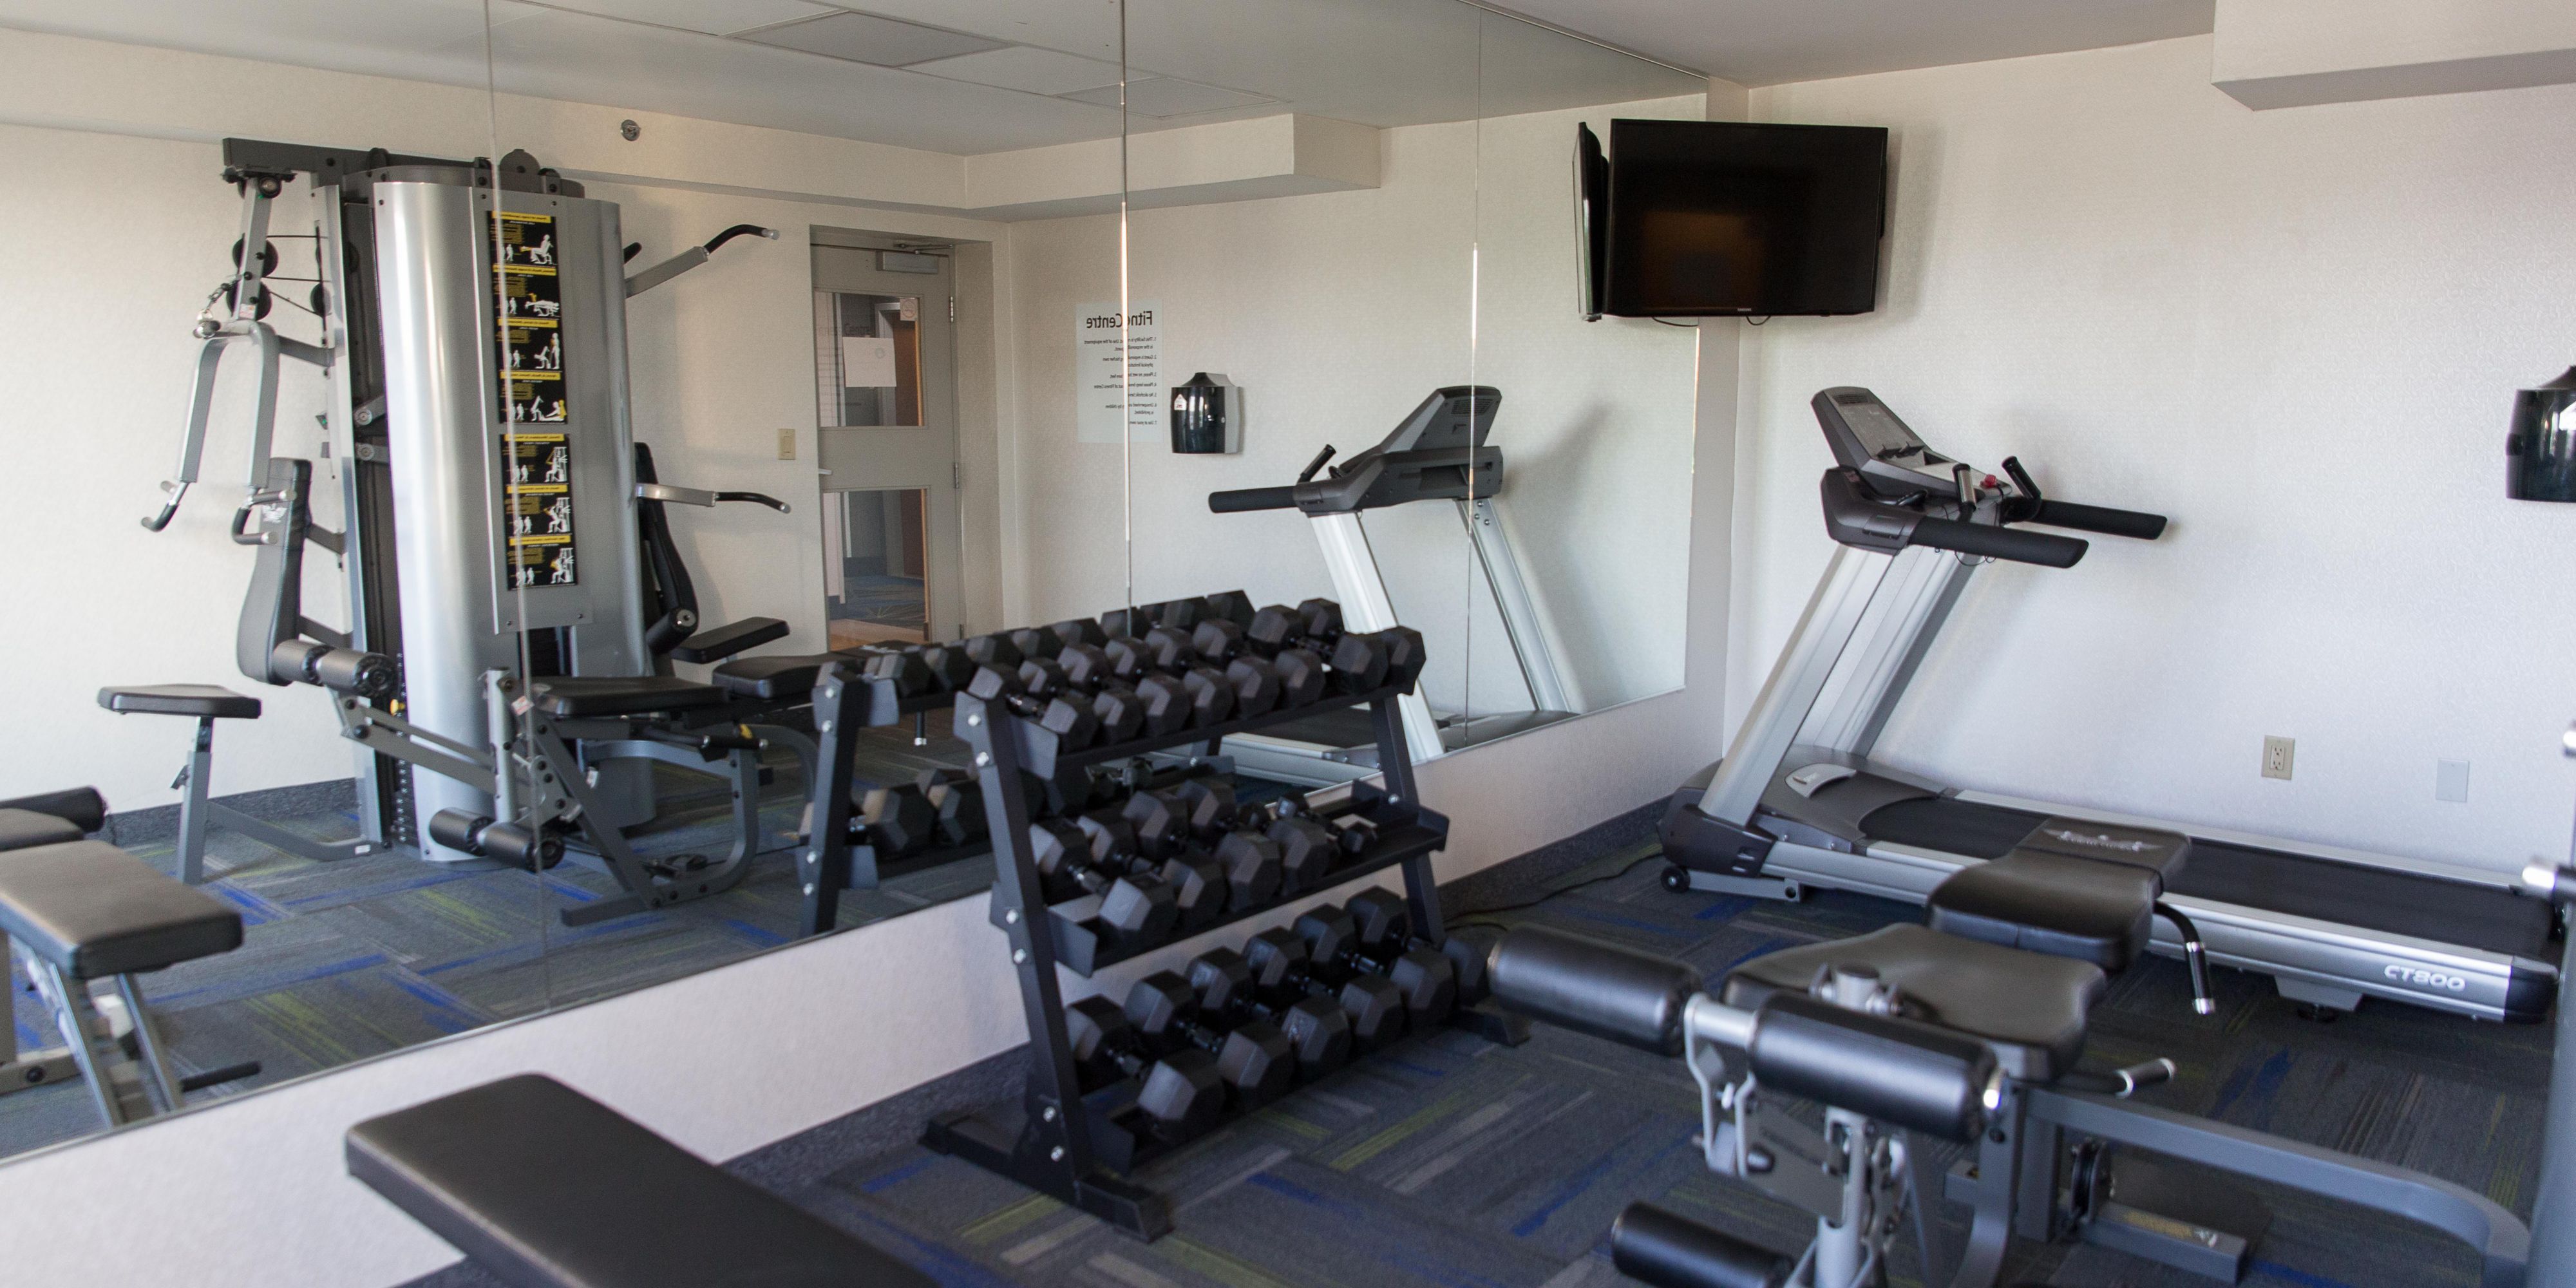 Our hotel features two fitness centers, with a great variety of equipment, suitable for any type of workout. We've got several cardio options including treadmills, elliptical and recumbent bikes. We also have a full set of dumbbell free weights up to 50 lbs and more!